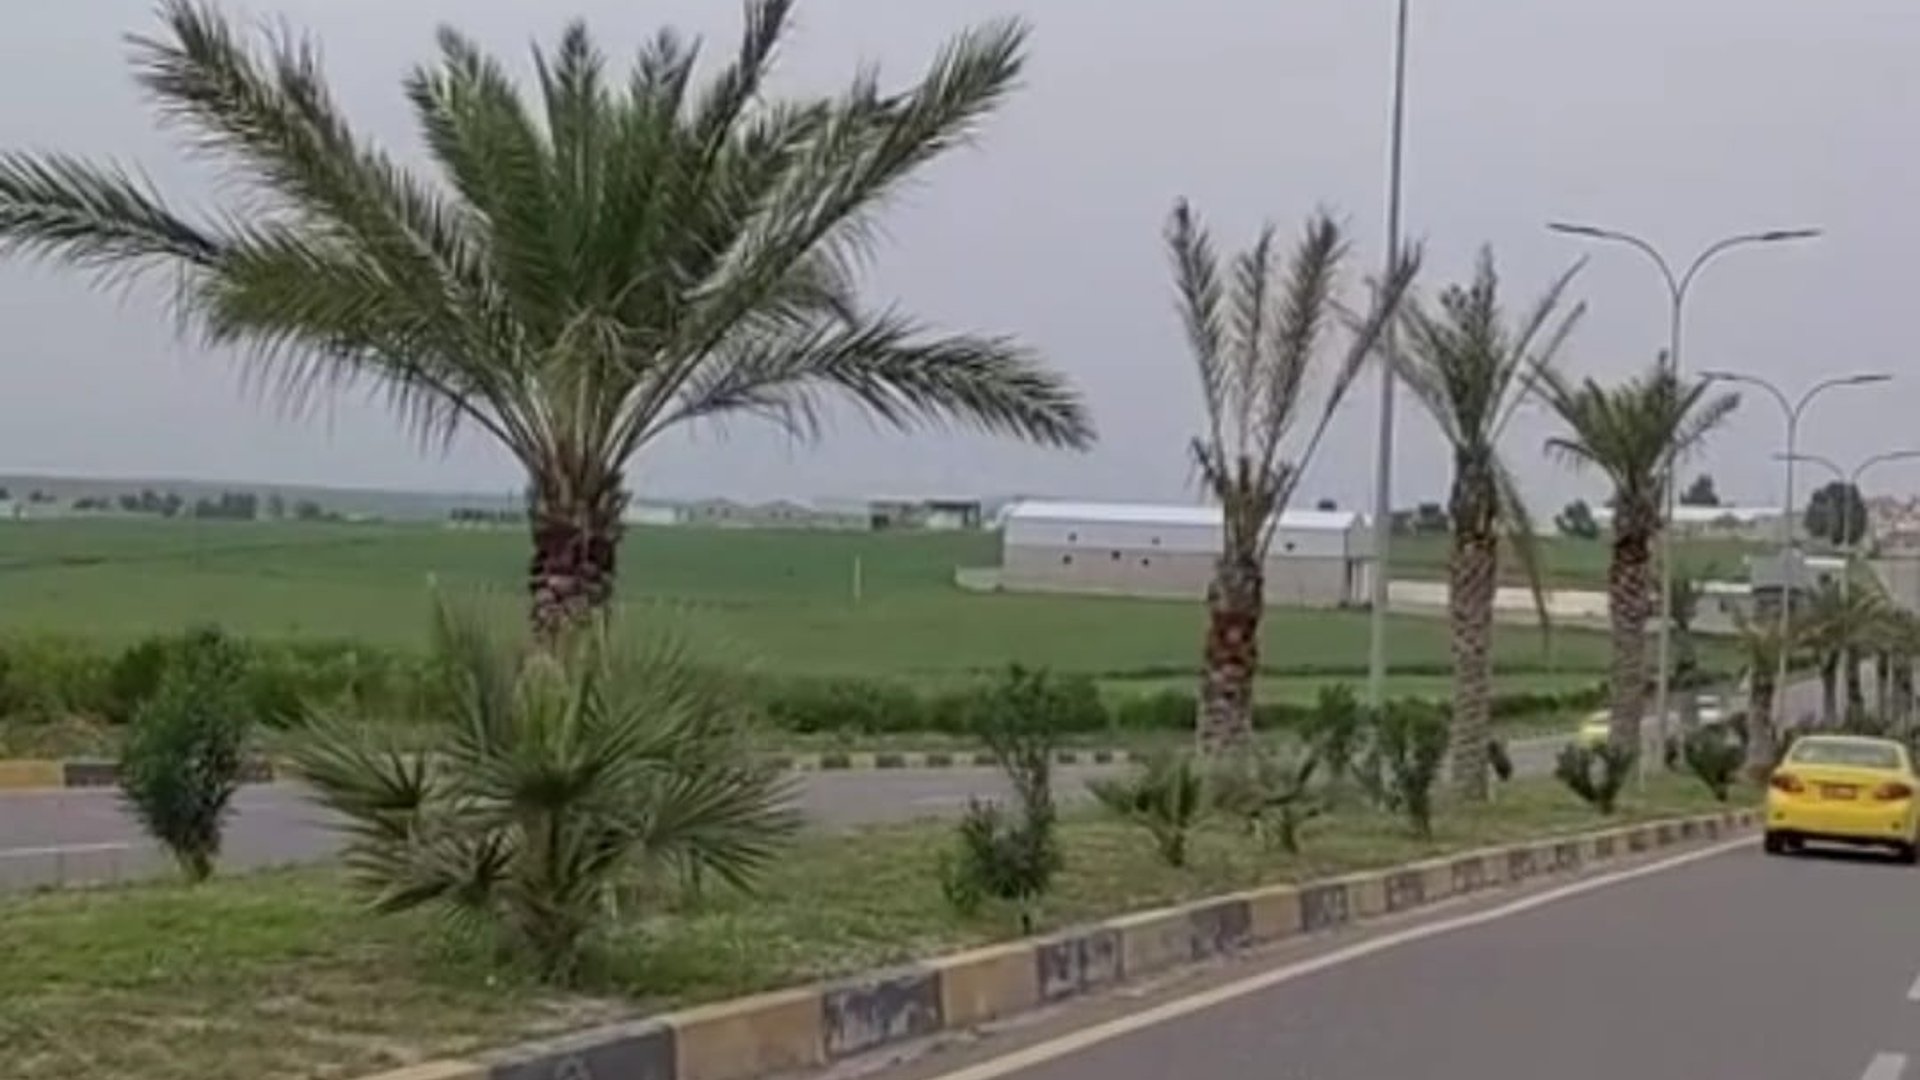 Basra farmer cultivates palm trees in Mosul and Dohuk defying conventional beliefs